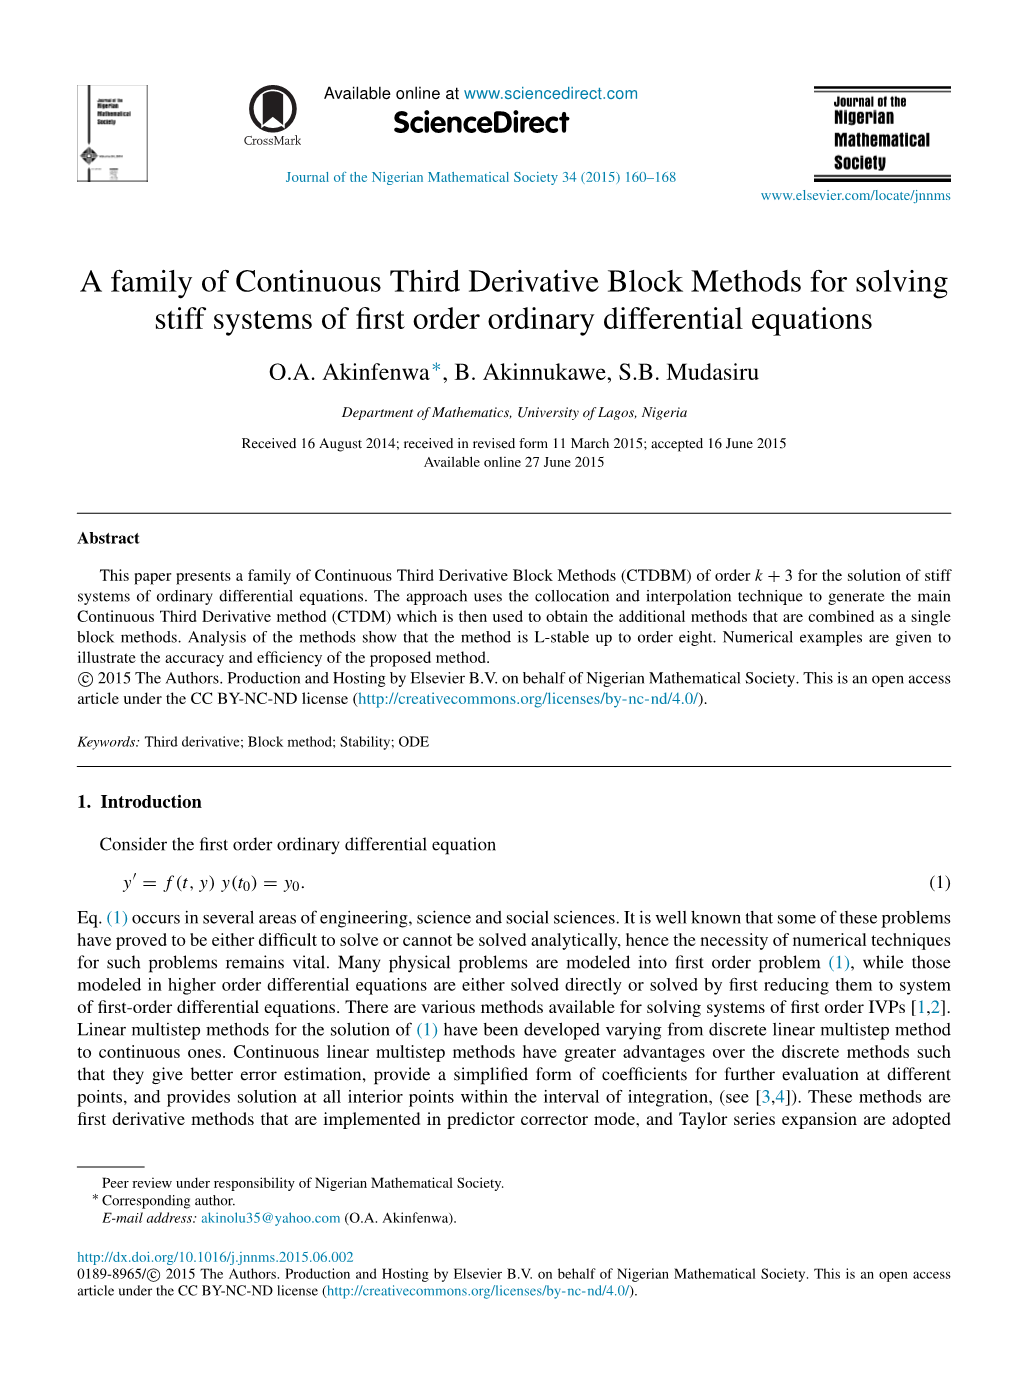 A Family of Continuous Third Derivative Block Methods for Solving Stiff Systems of First Order Ordinary Differential Equations